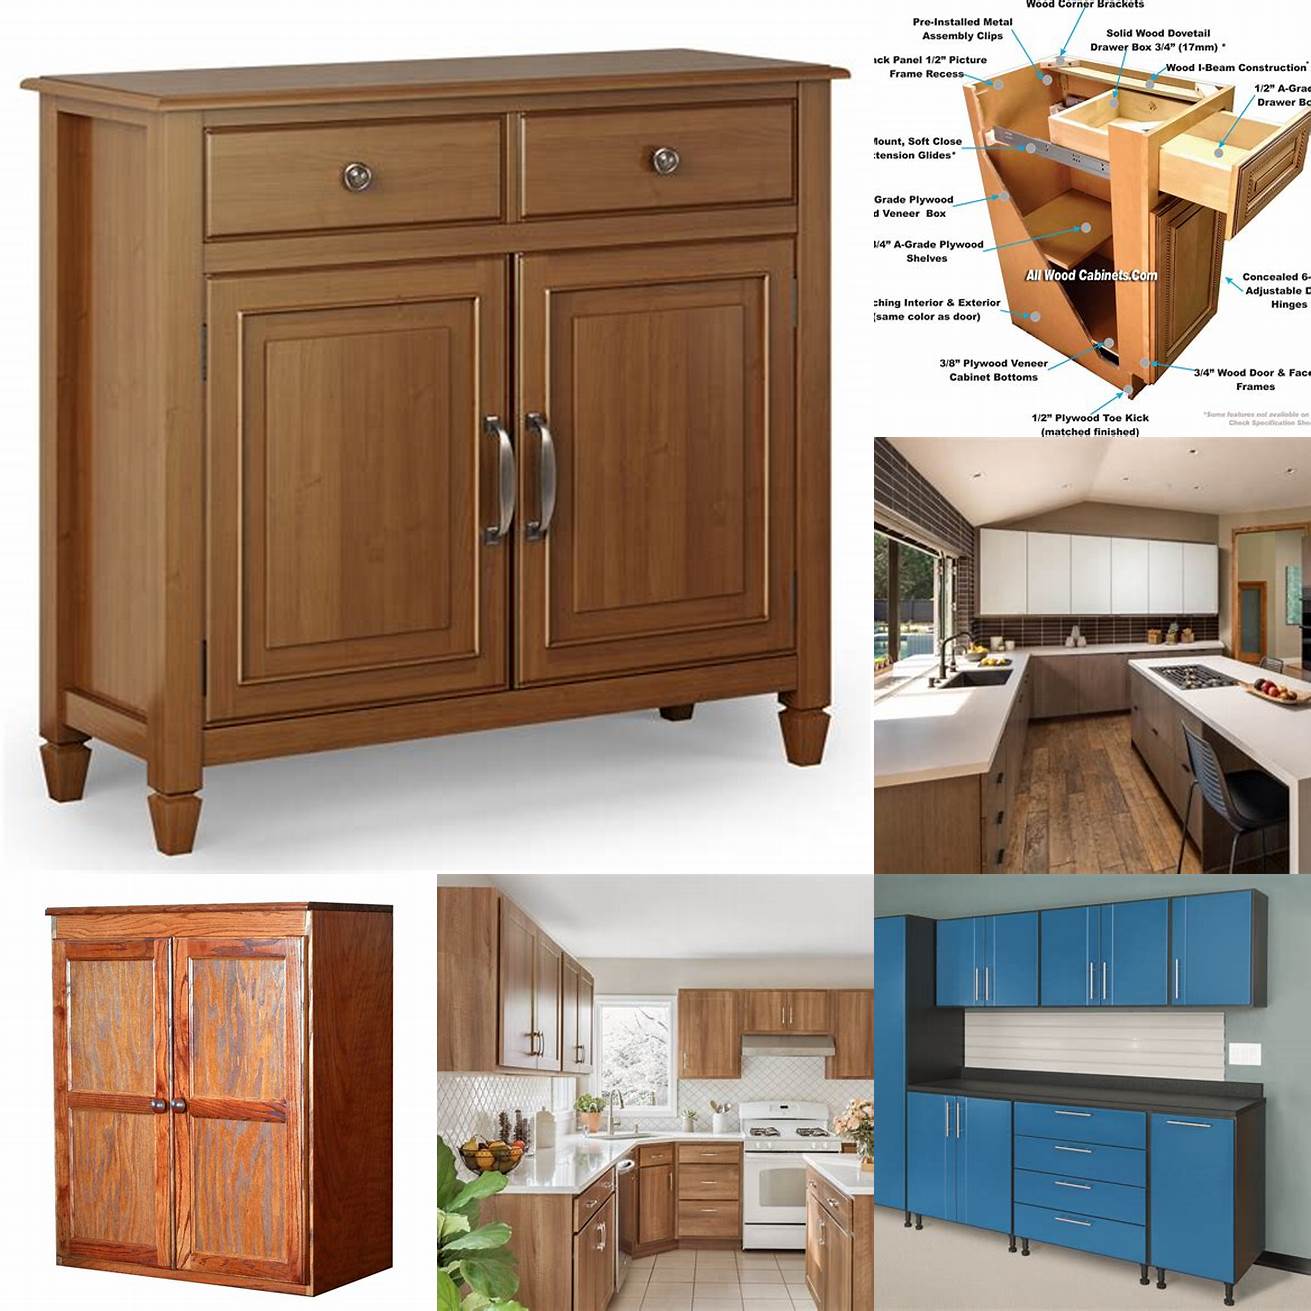 Quality Choose a cabinet that is made of high-quality materials and has sturdy construction Check for reviews and warranties before making a purchase